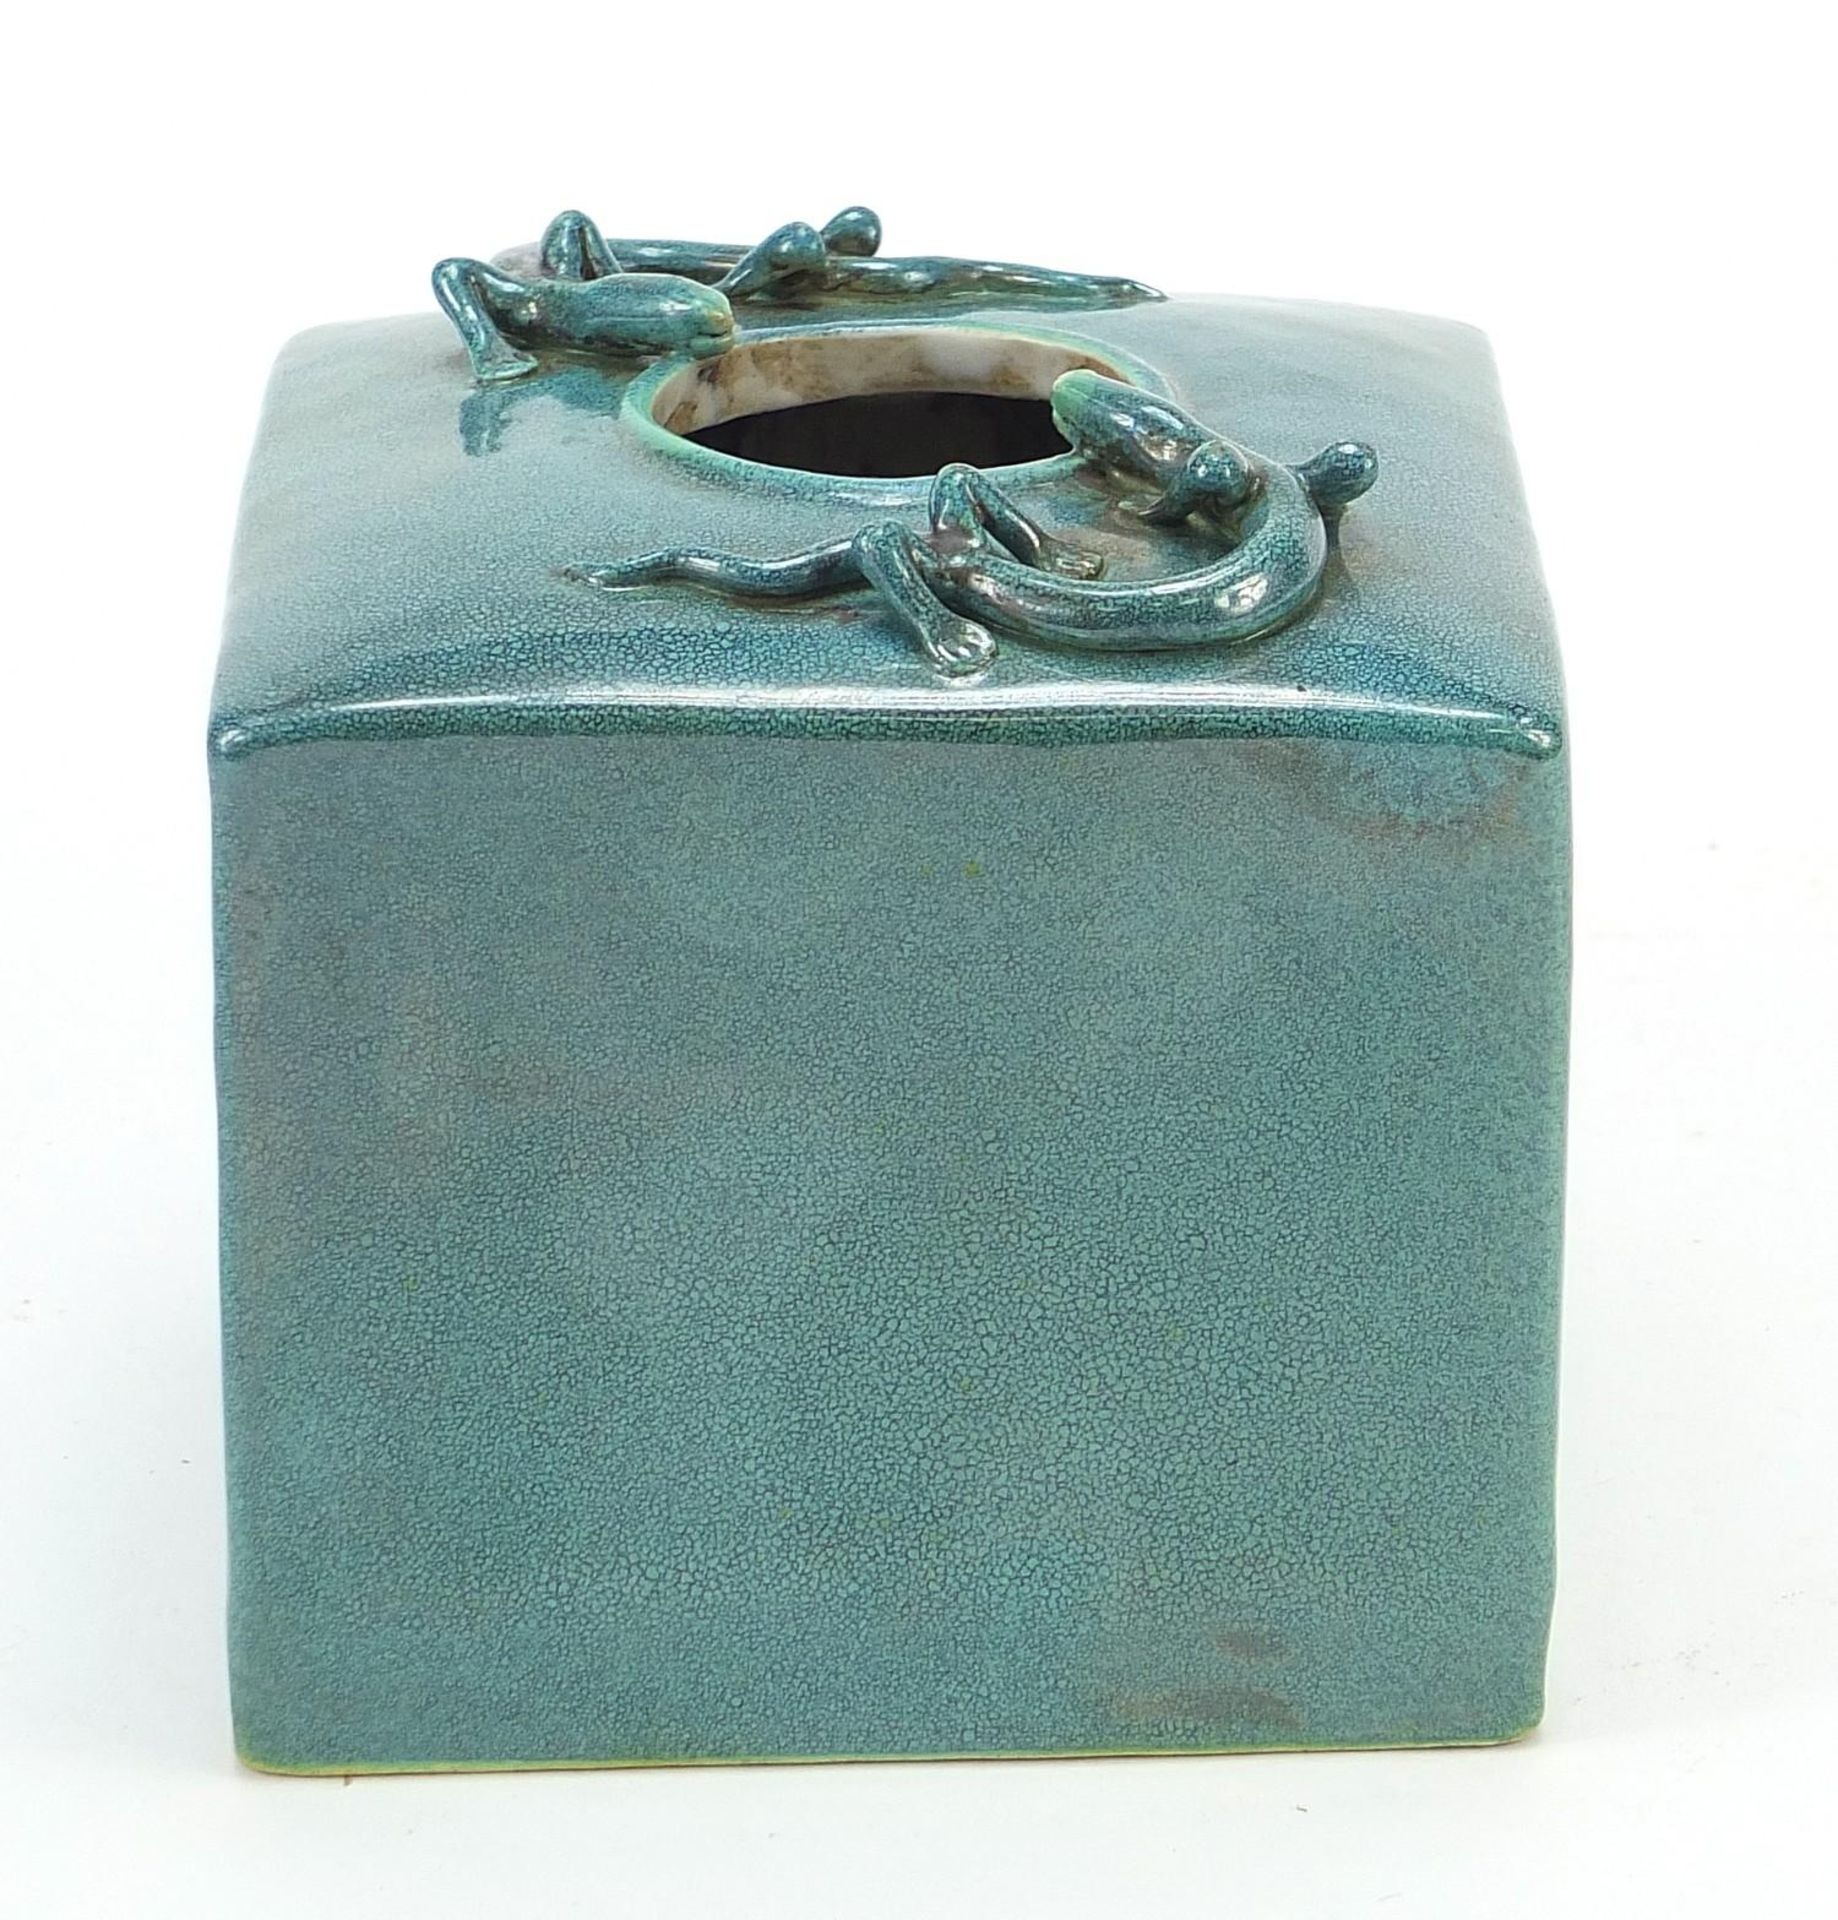 Chinese porcelain brush pot with relief lizard decoration, having a spotted turquoise glaze, 10cm - Image 2 of 7